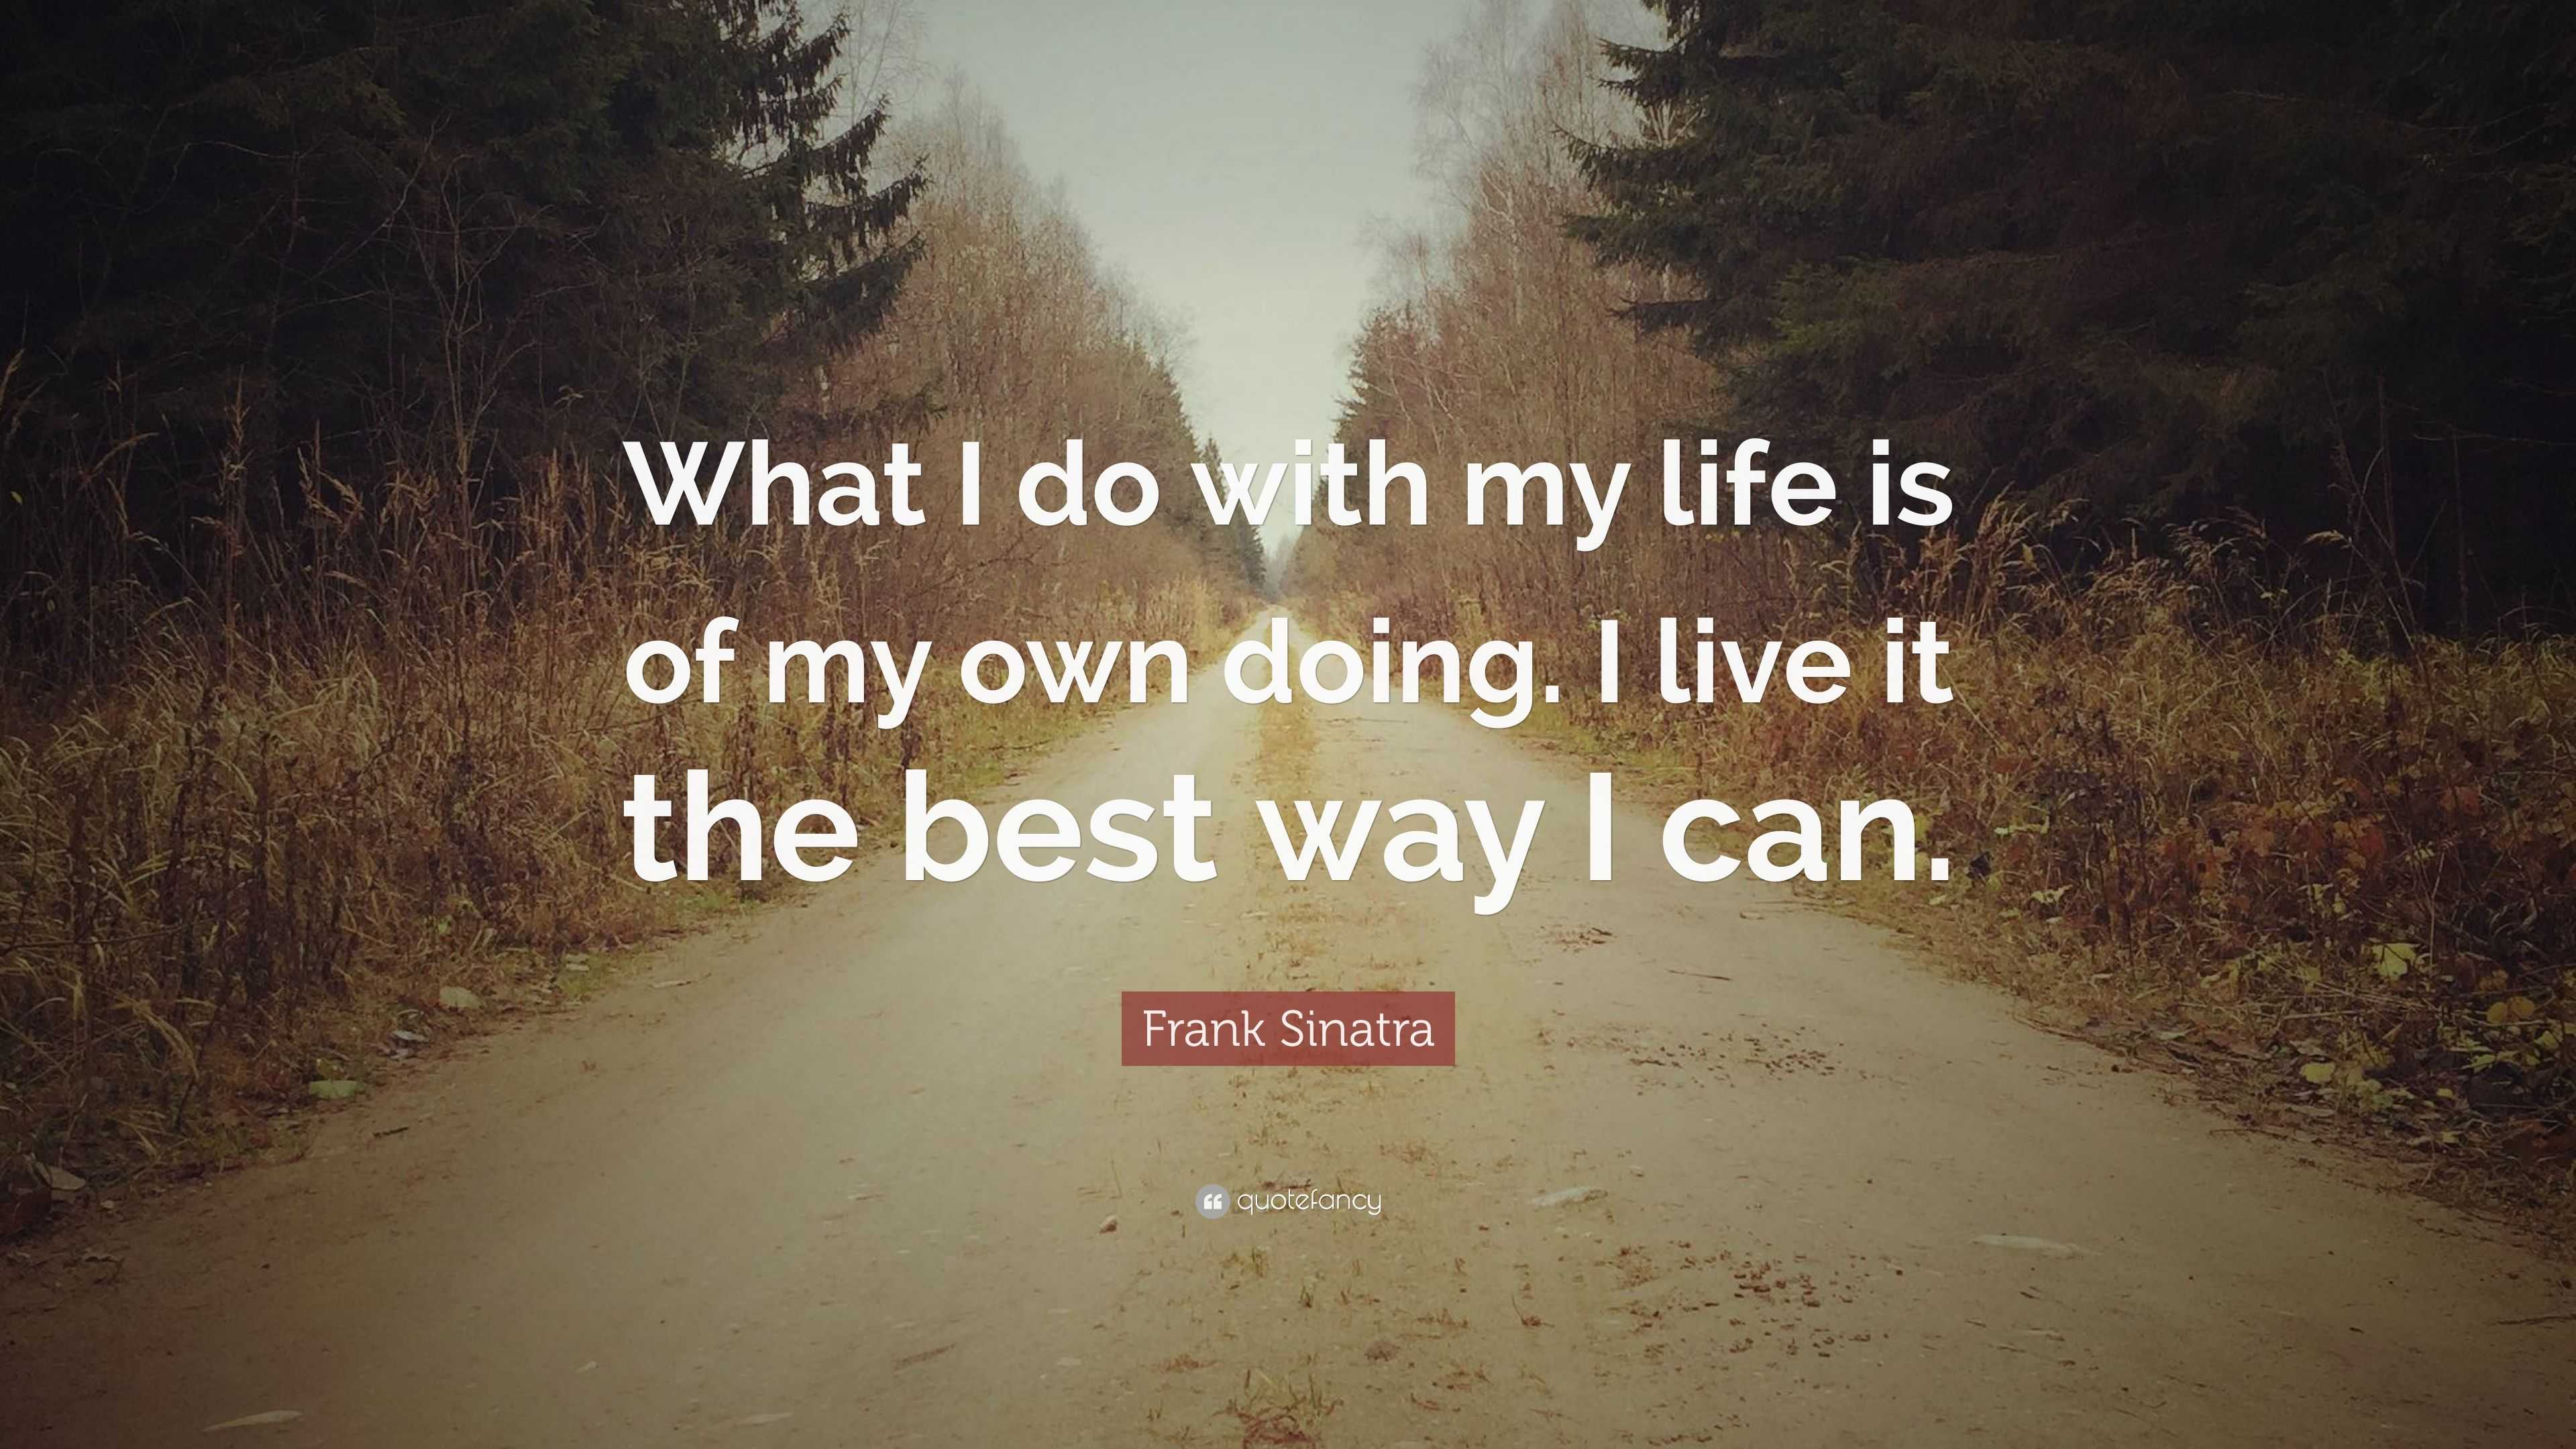 Frank Sinatra Quote: “What I do with my life is of my own doing. I live ...